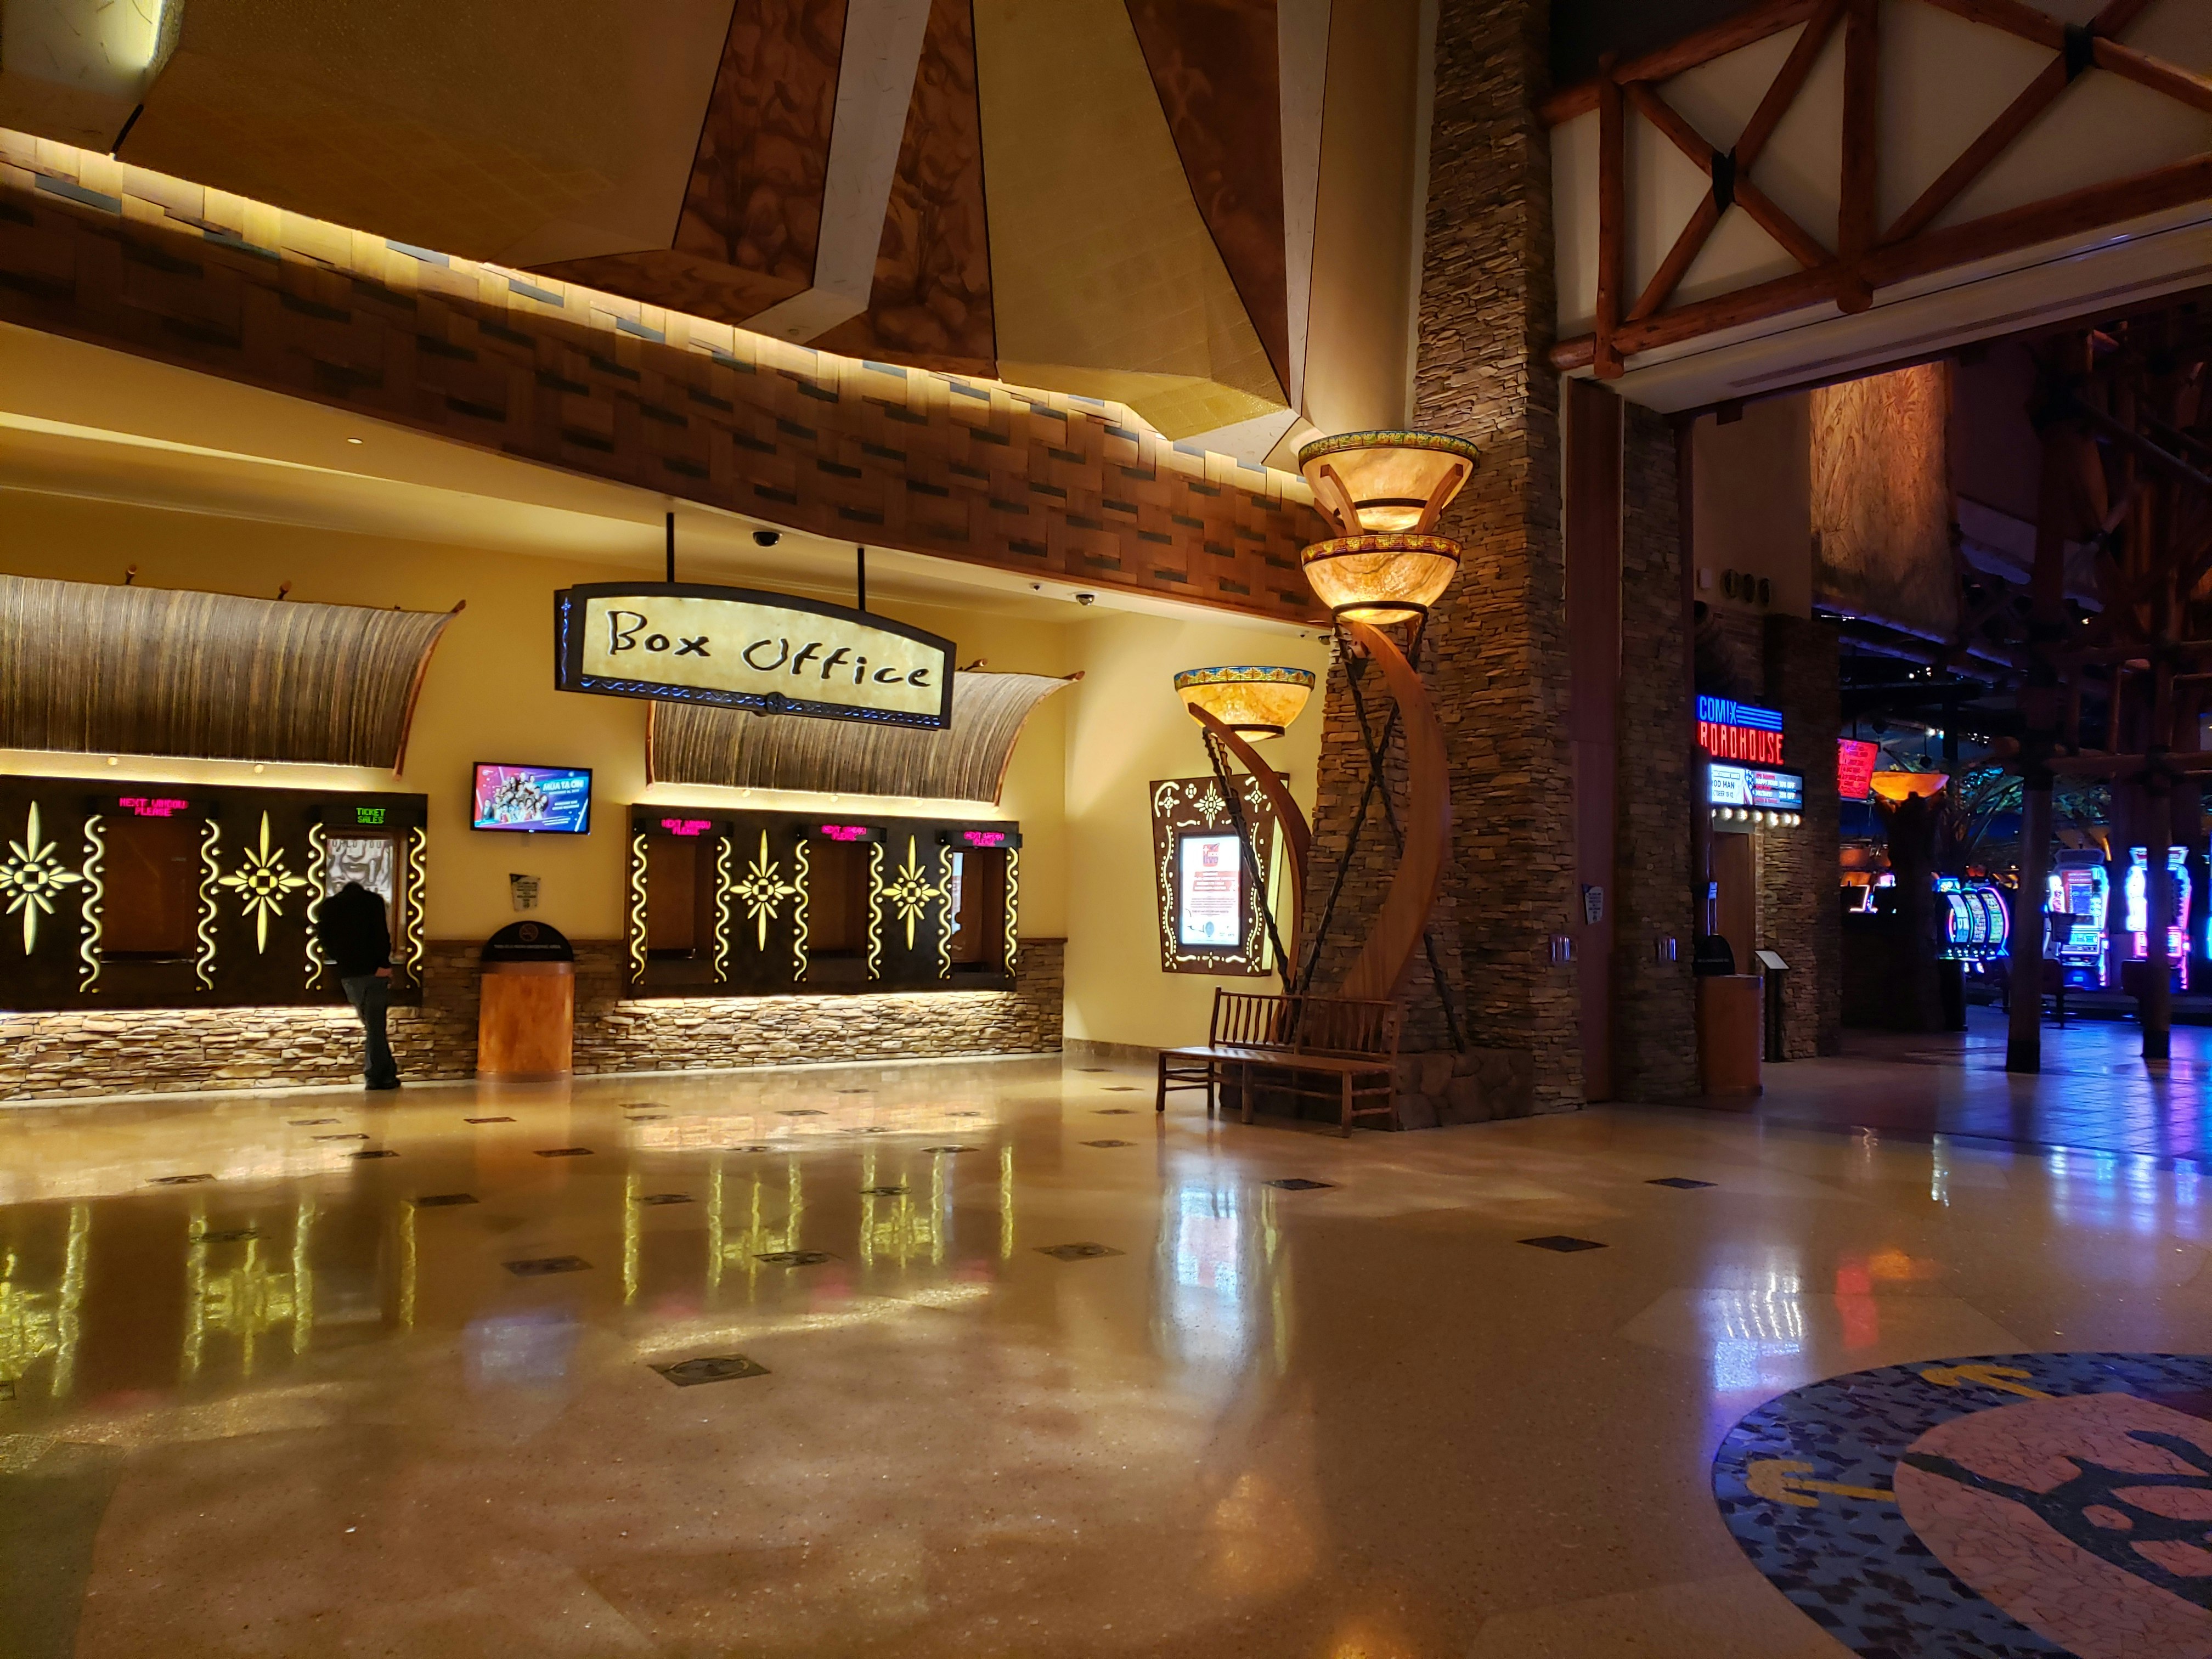 The golden-hewed lobby of the Arena at Mohgen Sun Casino is decorated with a flagstone column, contemporary stained glass light fixtures, curved warm wood, and abstract modernist forms in yellow adn brown hues. A large sign says Box Office in a rustic font. In the bottom right corner of the frame, a circular blue mosaic in the floor can be seen. In the distance, glowing signs from the Comix Roadhouse and arcades shine.